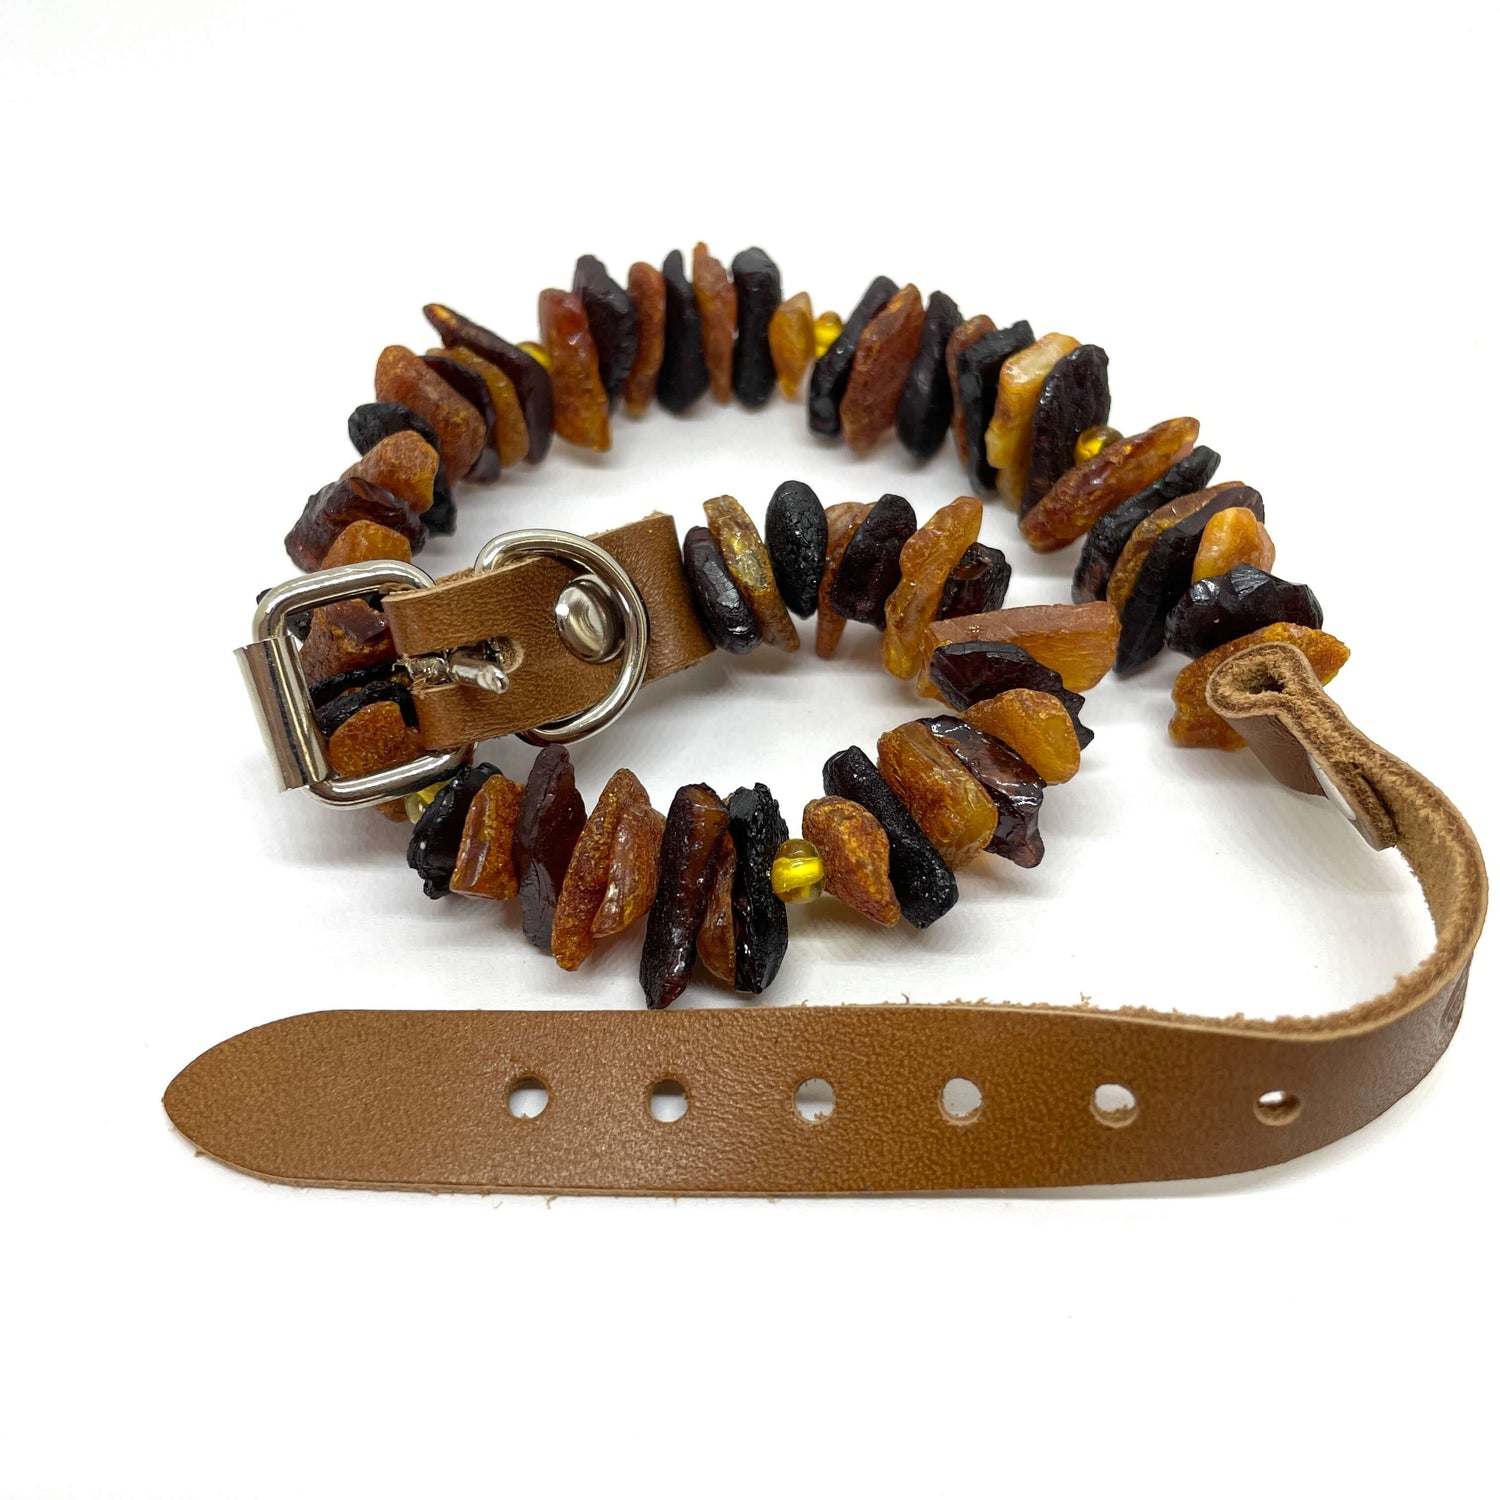 Amber Collar for Dogs & Cats with Adjustable Leather Belt